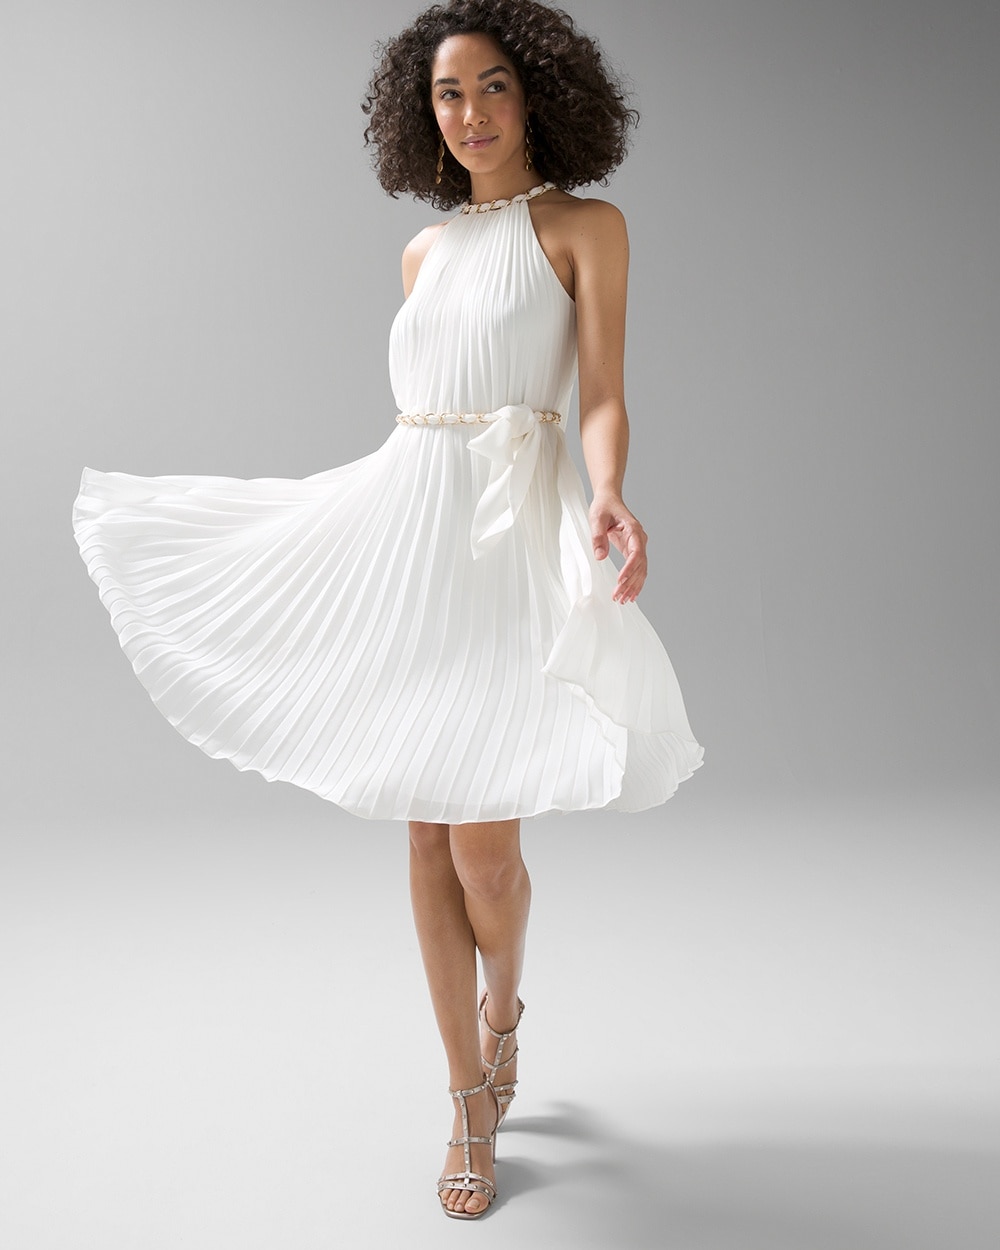 Petite Sleeveless Pleated Halter Dress with Chain Detail